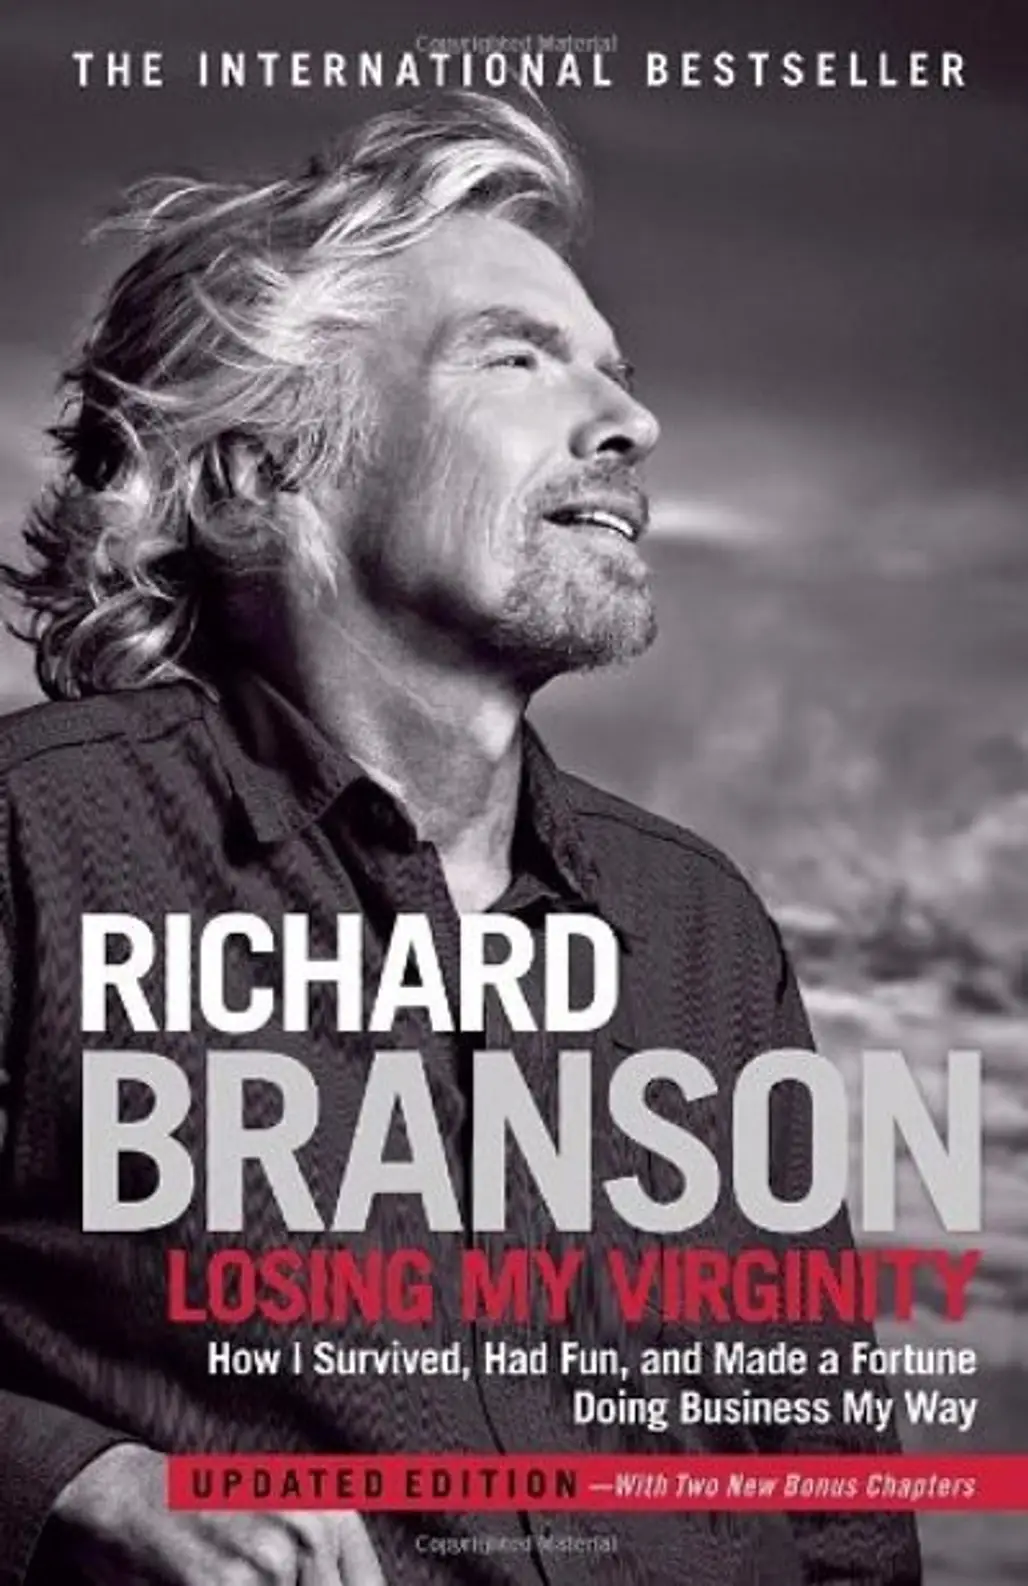 Losing My Virginity: How I Survived, Had Fun, and Made a Fortune Doing Business My Way – Richard Branson